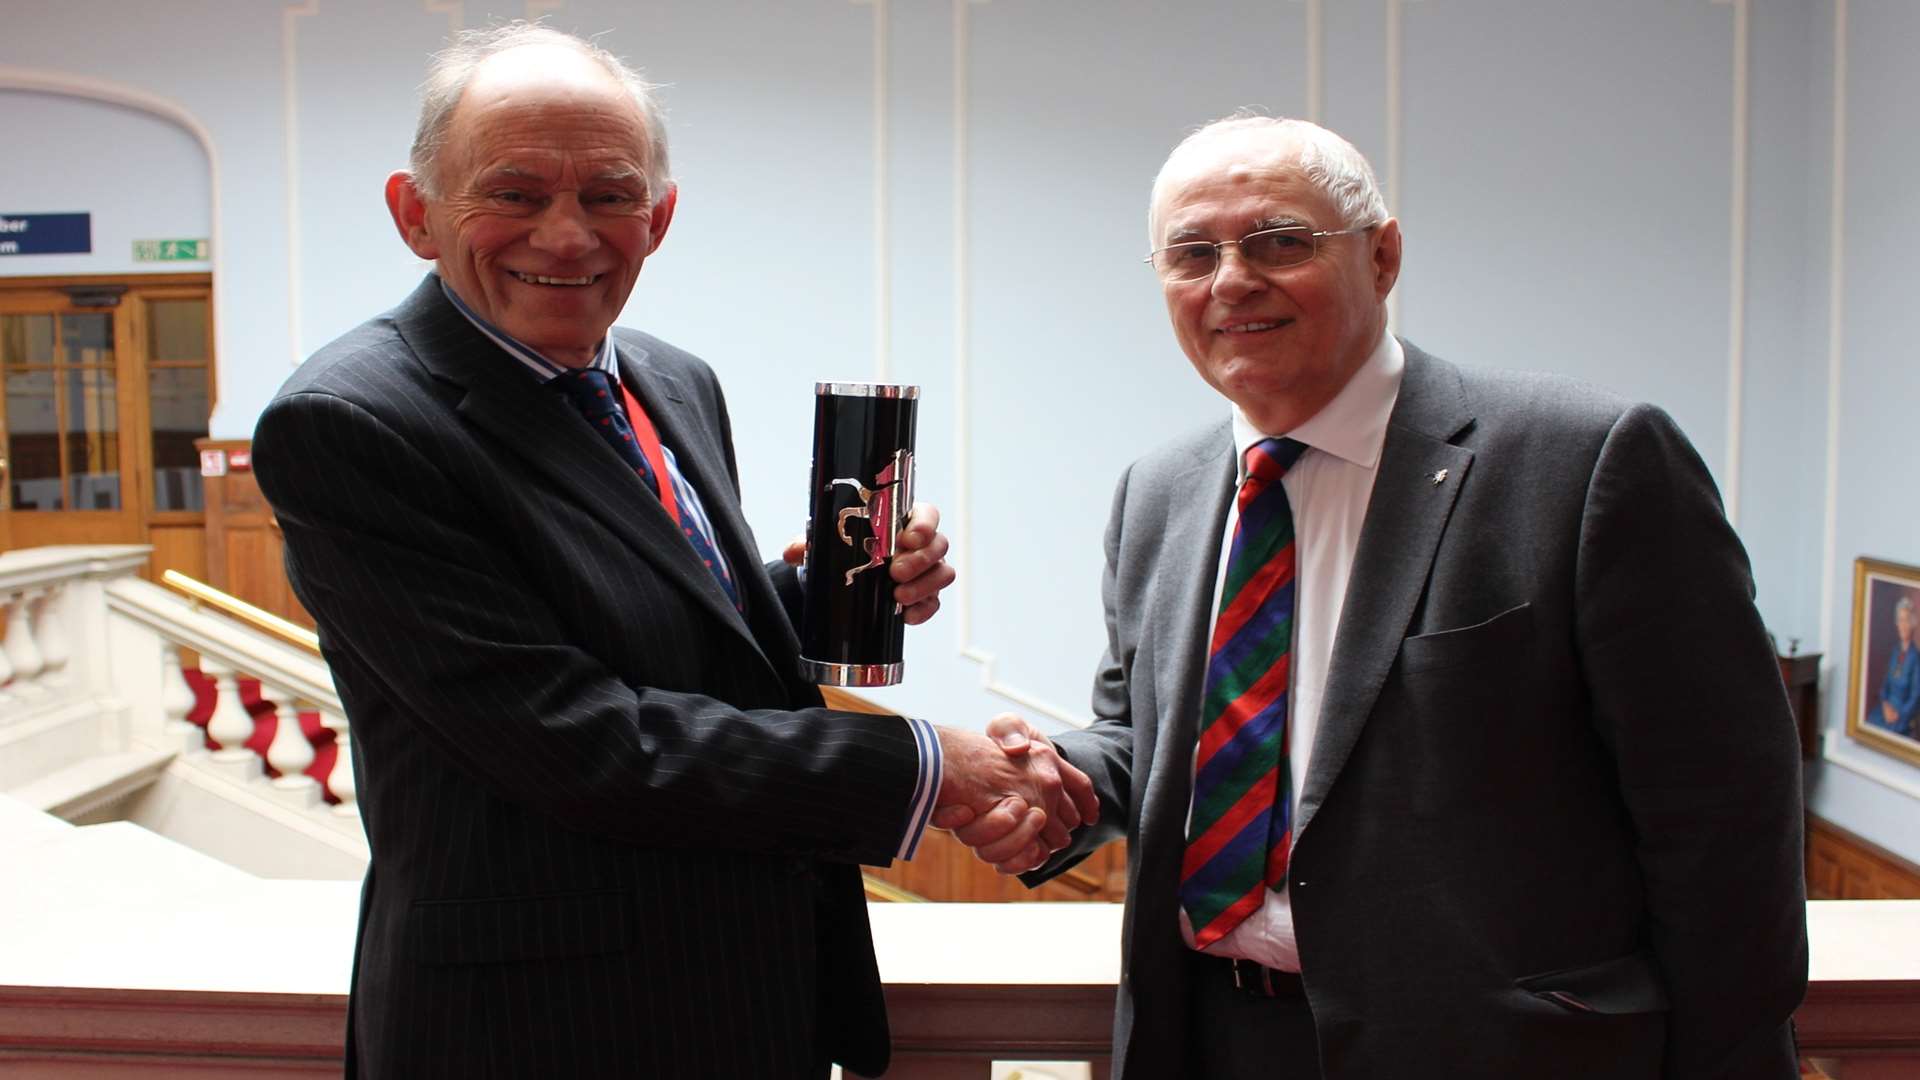 Maidstone Studios owner Geoff Miles, right, is presented with the Kent Invicta Award by KCC chairman David Brazier